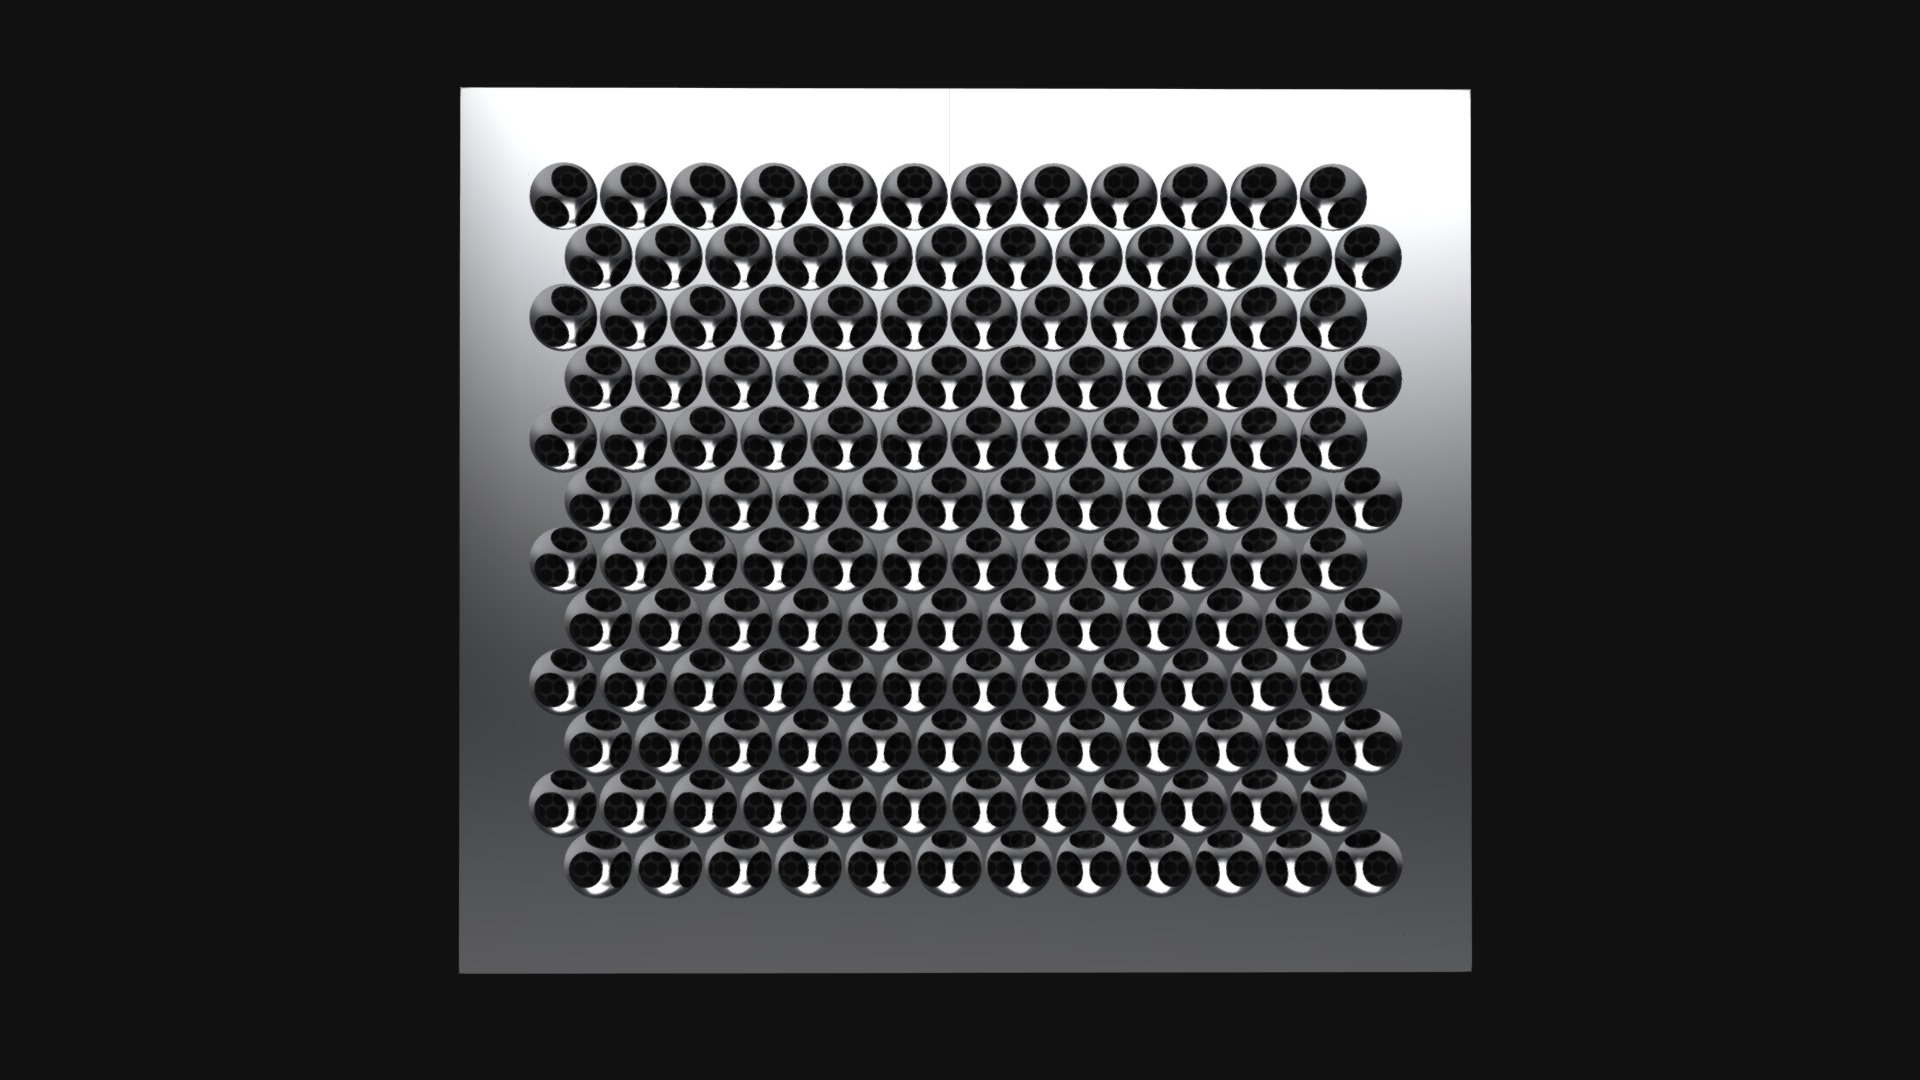 3D model Seamless Abstract Mesh Pattern - This is a 3D model of the Seamless Abstract Mesh Pattern. The 3D model is about a black and white photo of a black and white patterned surface.